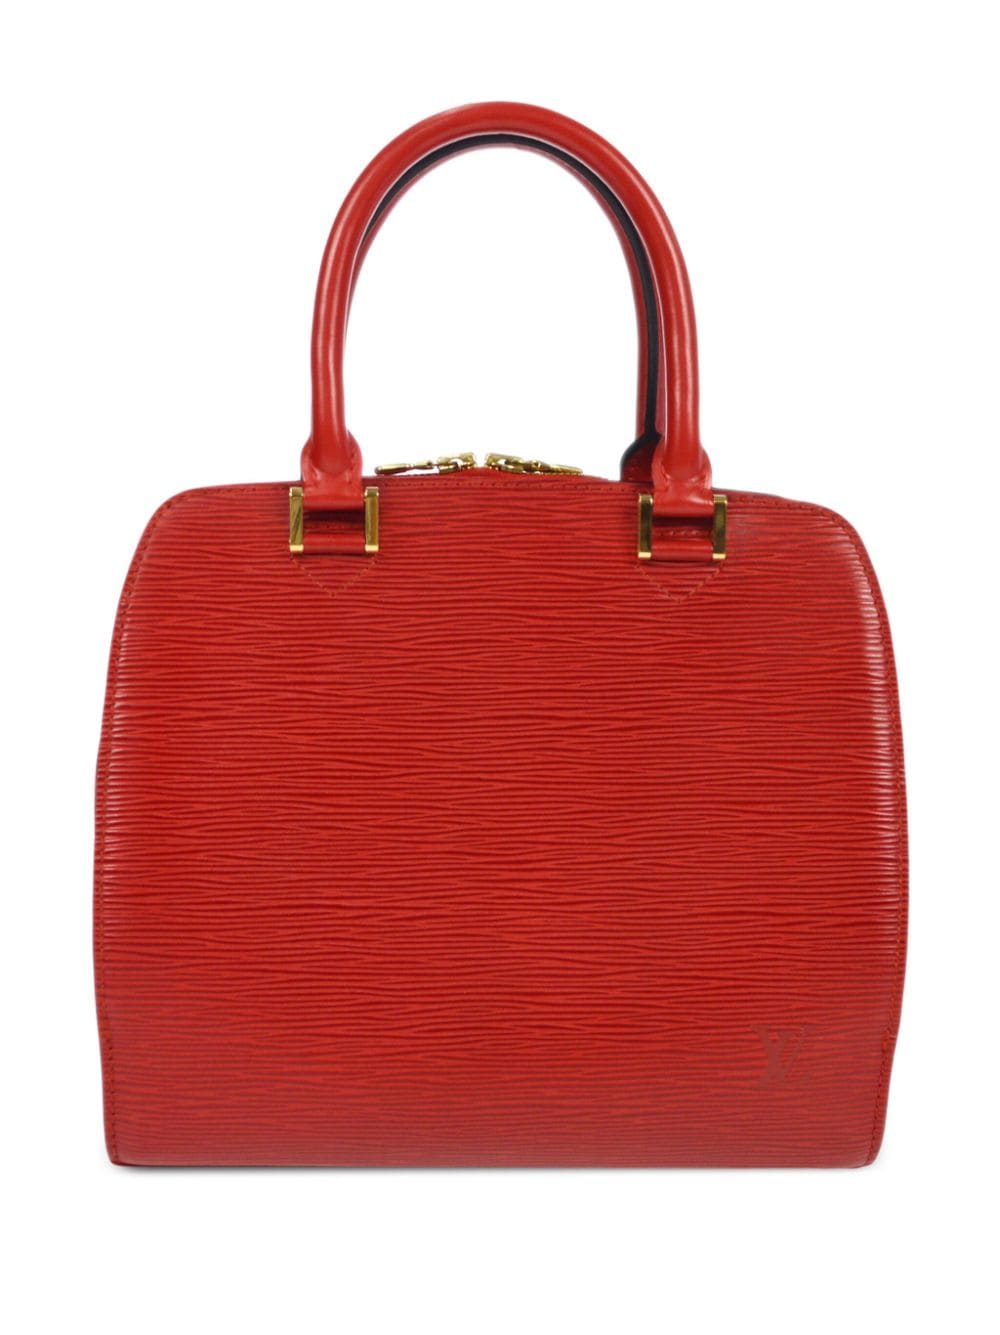 Louis Vuitton Pre-Owned 1998 Pont Neuf Handtasche - Rot von Louis Vuitton Pre-Owned